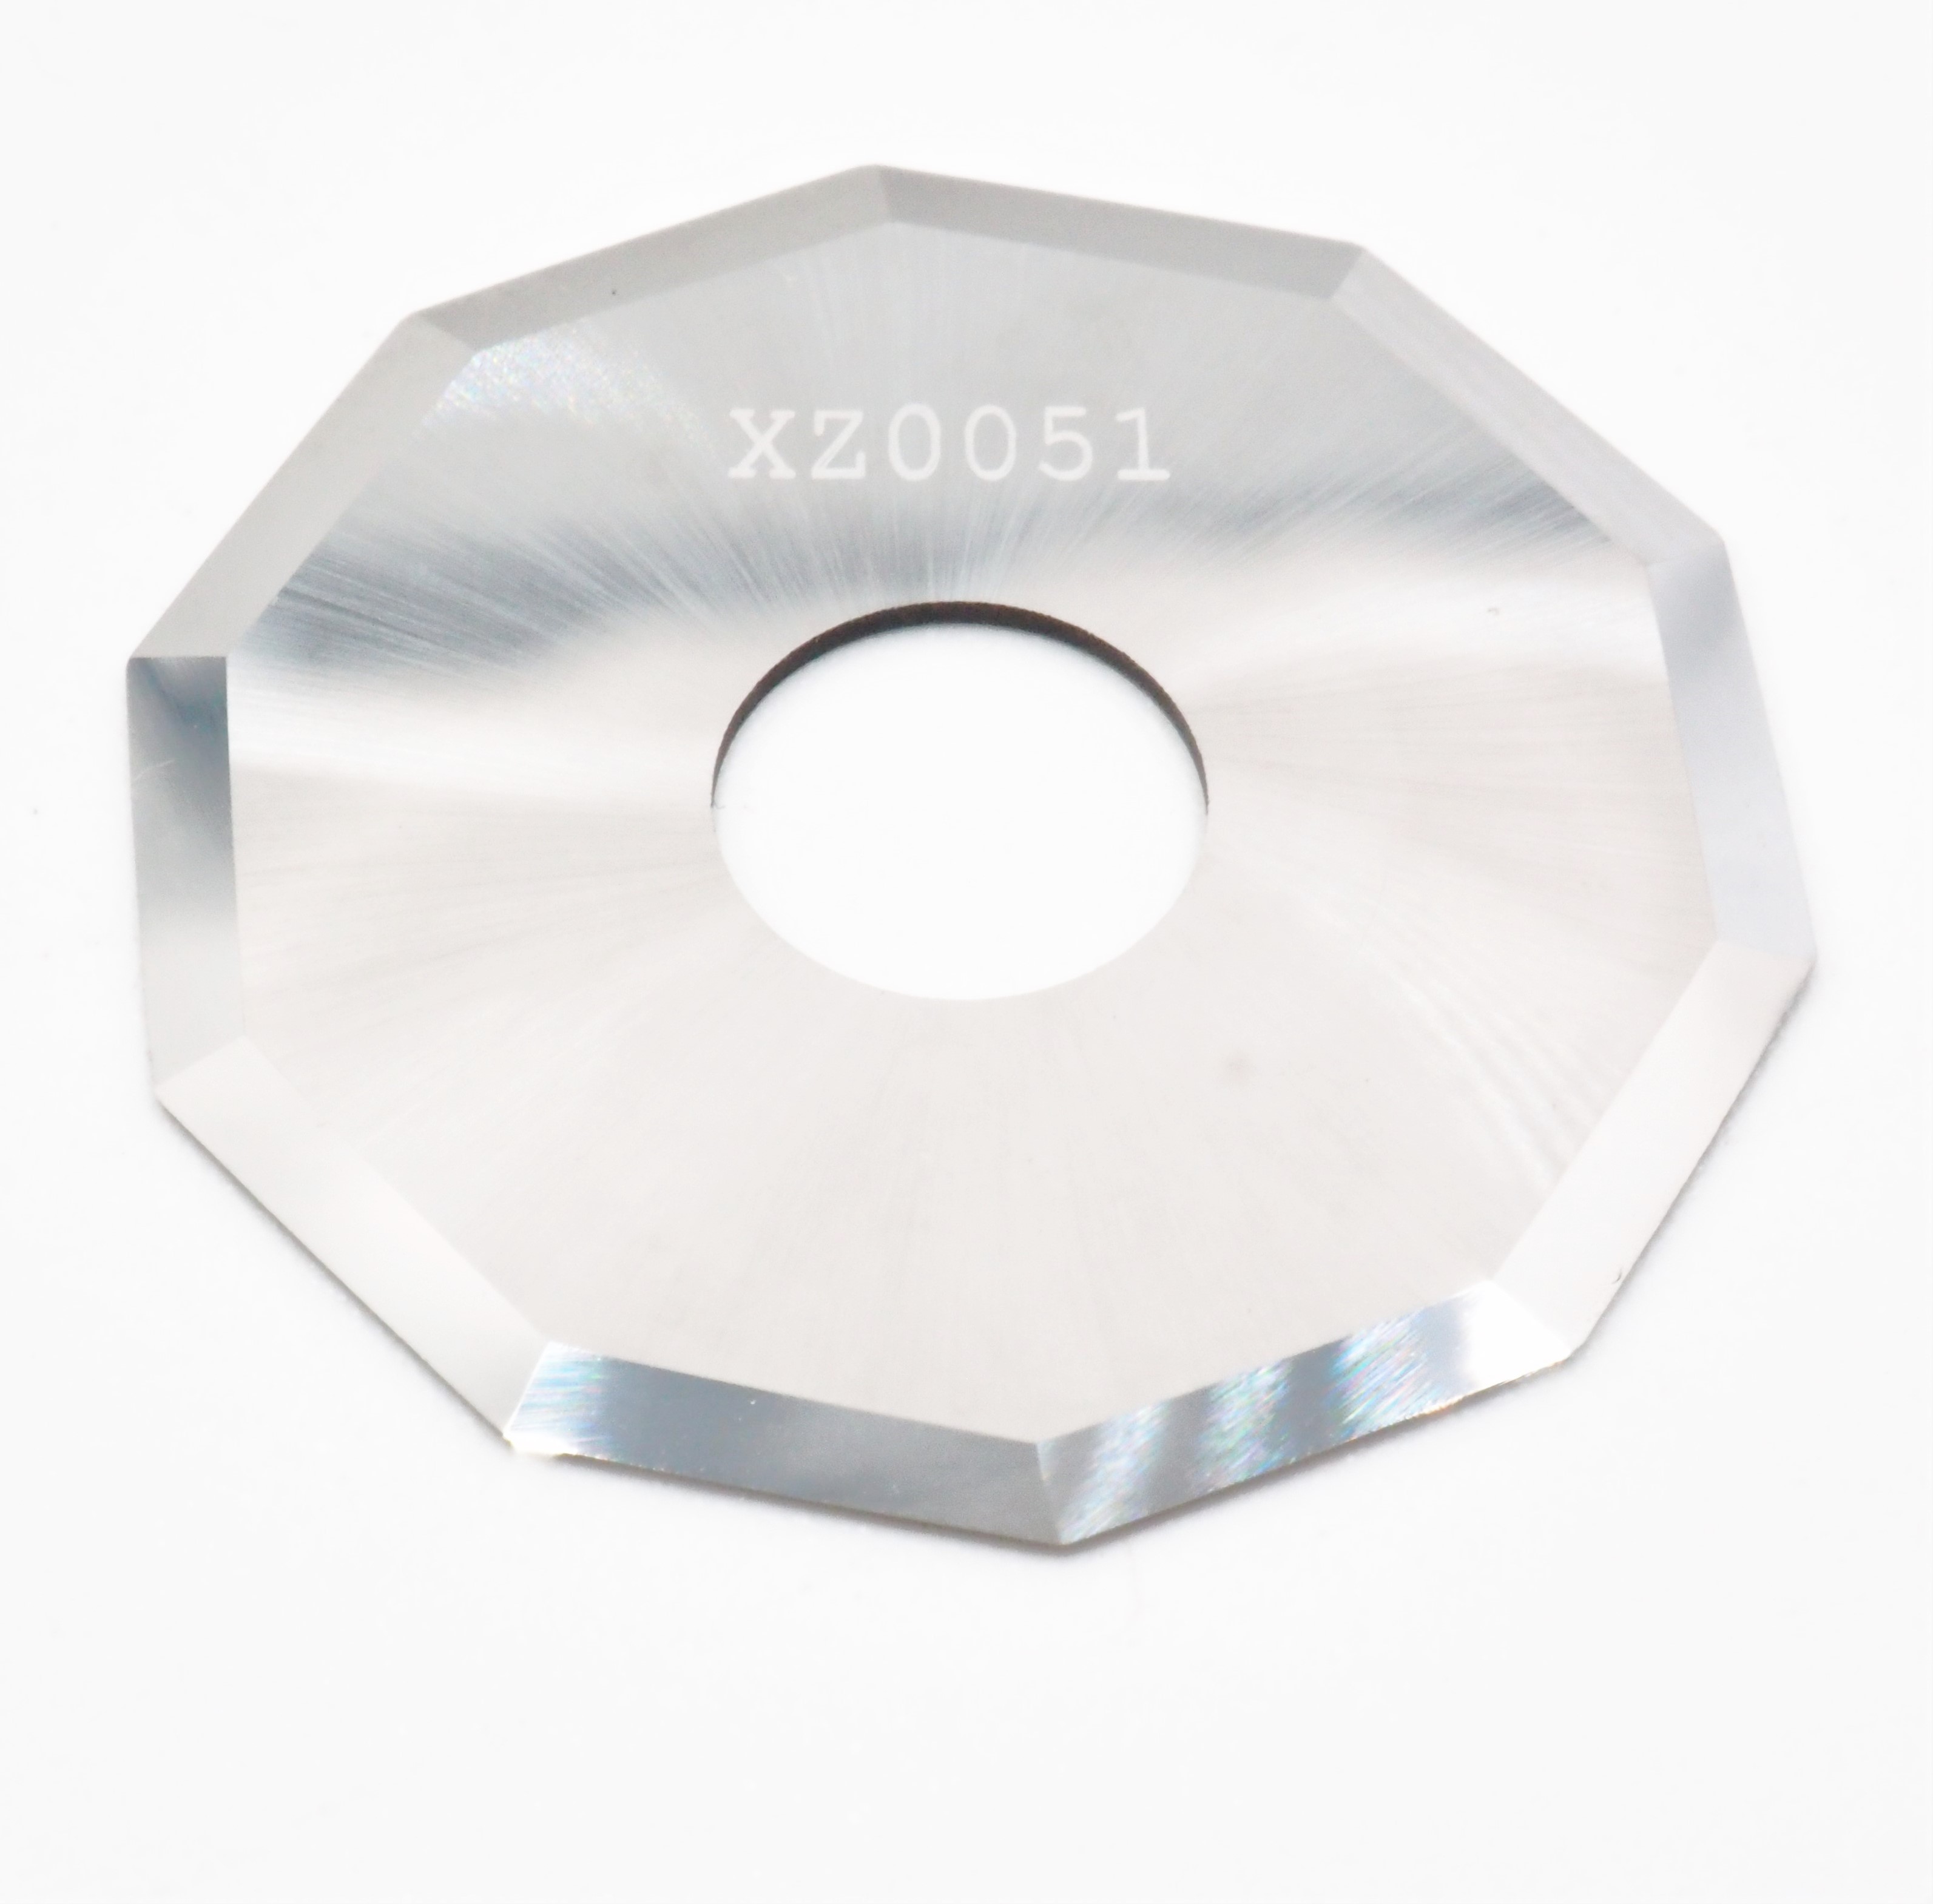 XZ0051 28mm round .6mm thick decagonal (10-Sided) rotary blade 5